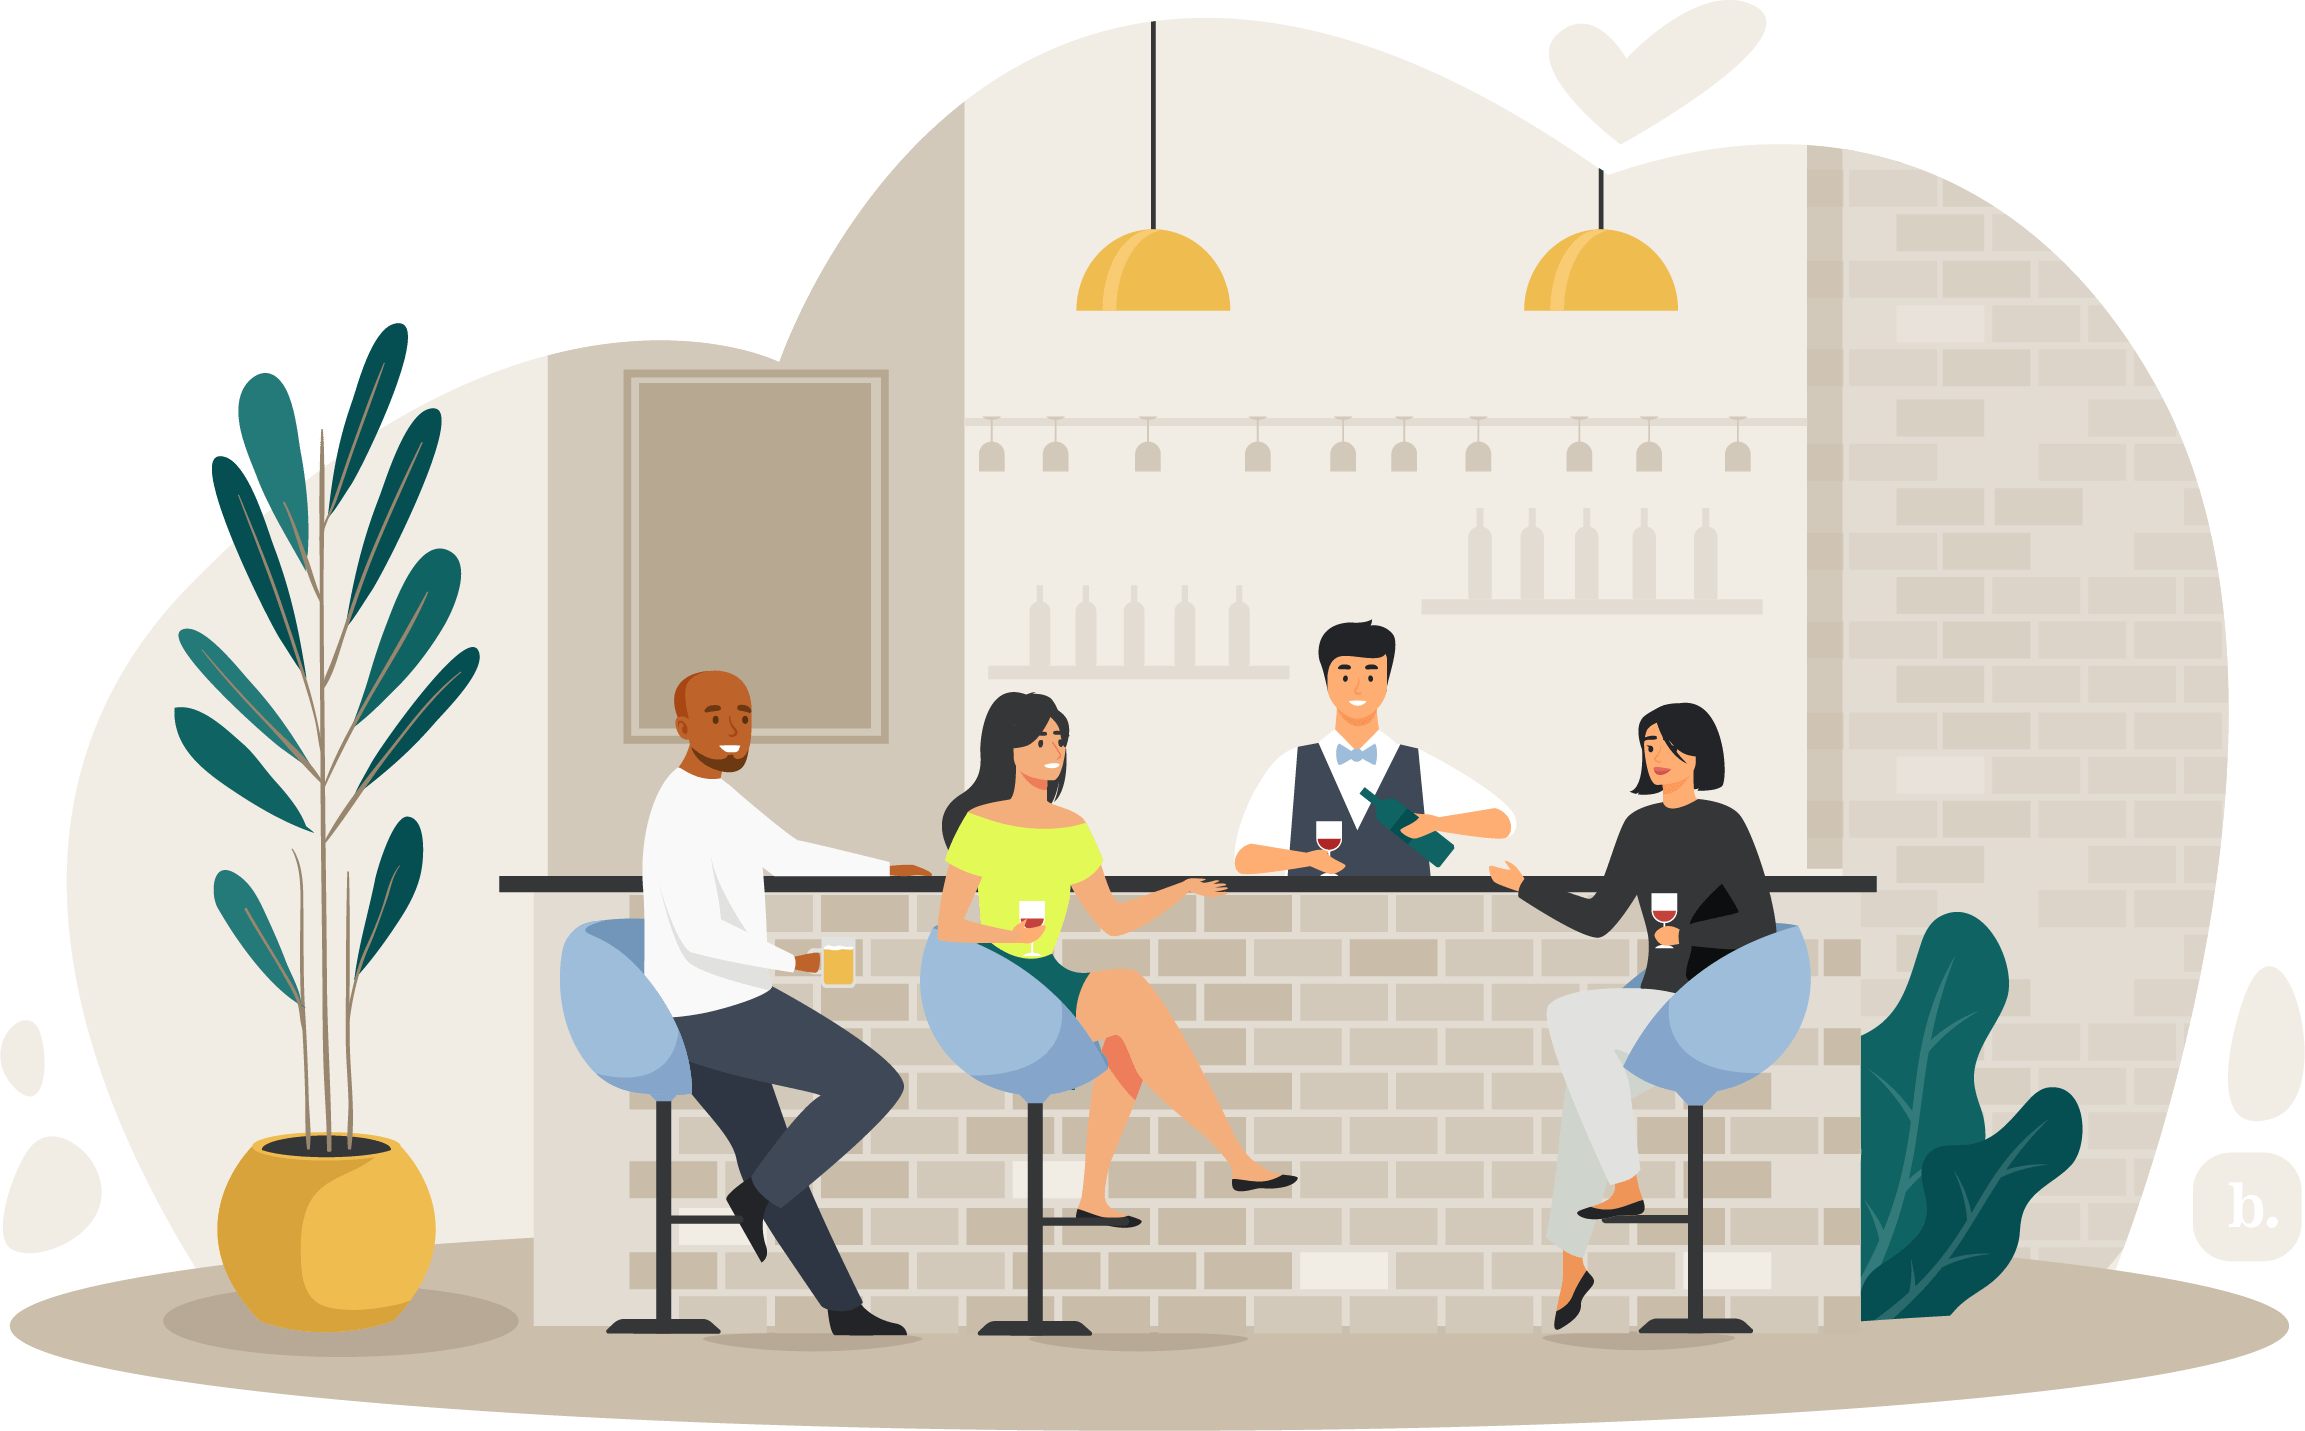 graphic of people at a bar sitting on stools